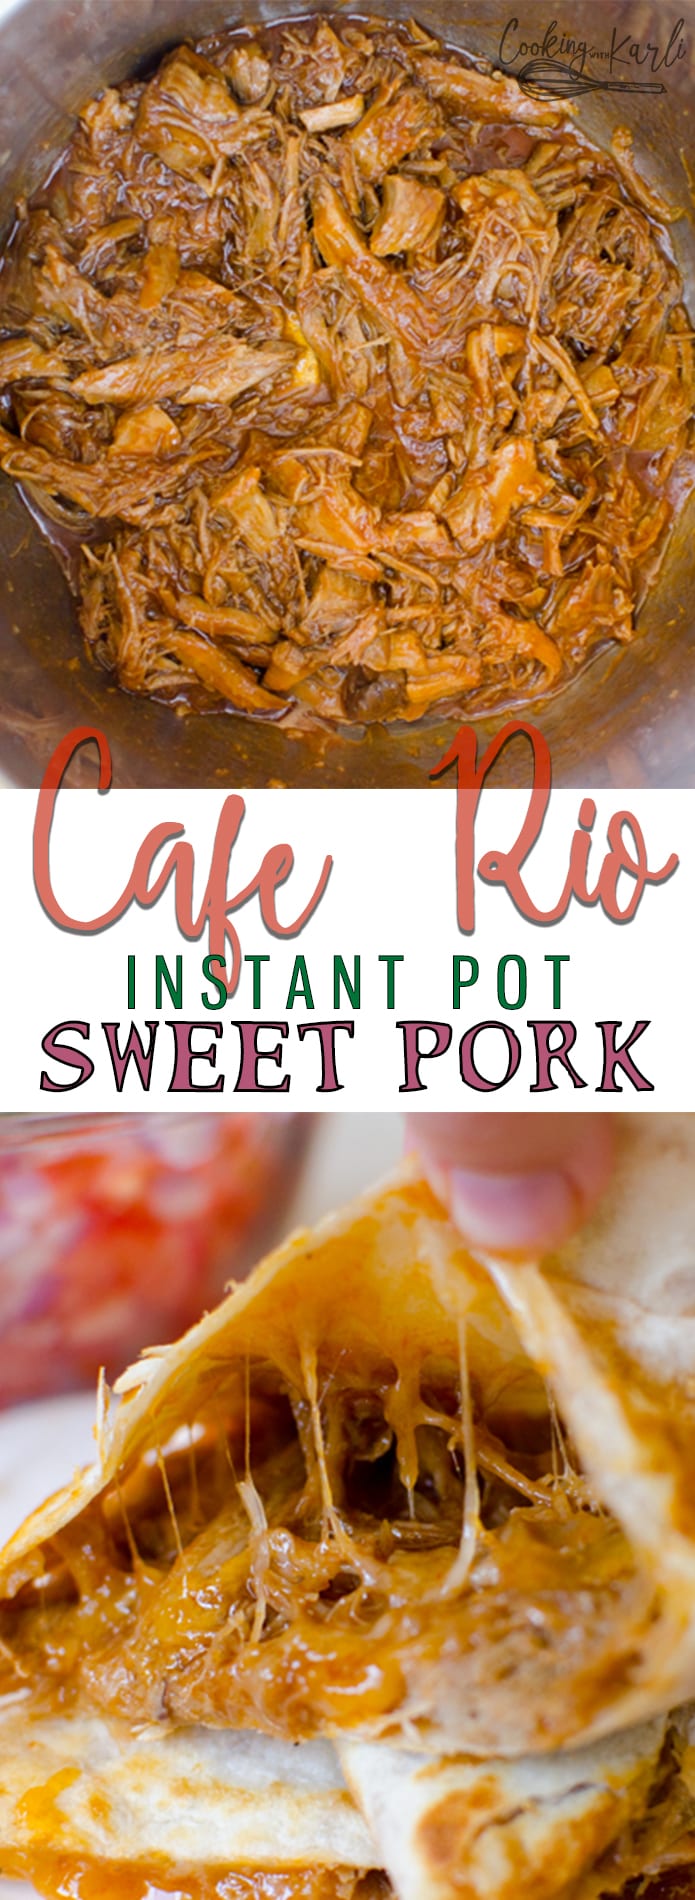 Cafe Rio Sweet Pork is made either in the Instant Pot or slow cooker. Sweet Pork is a tender, melt in your mouth pork with a sweet sauce made up of only 3 ingredients; taco sauce, Coke and brown sugar. Use on salads, in burritos or quesadillas! |Cooking with Karli| #caferio #sweetpork #easy #instantpot #salad #burrito